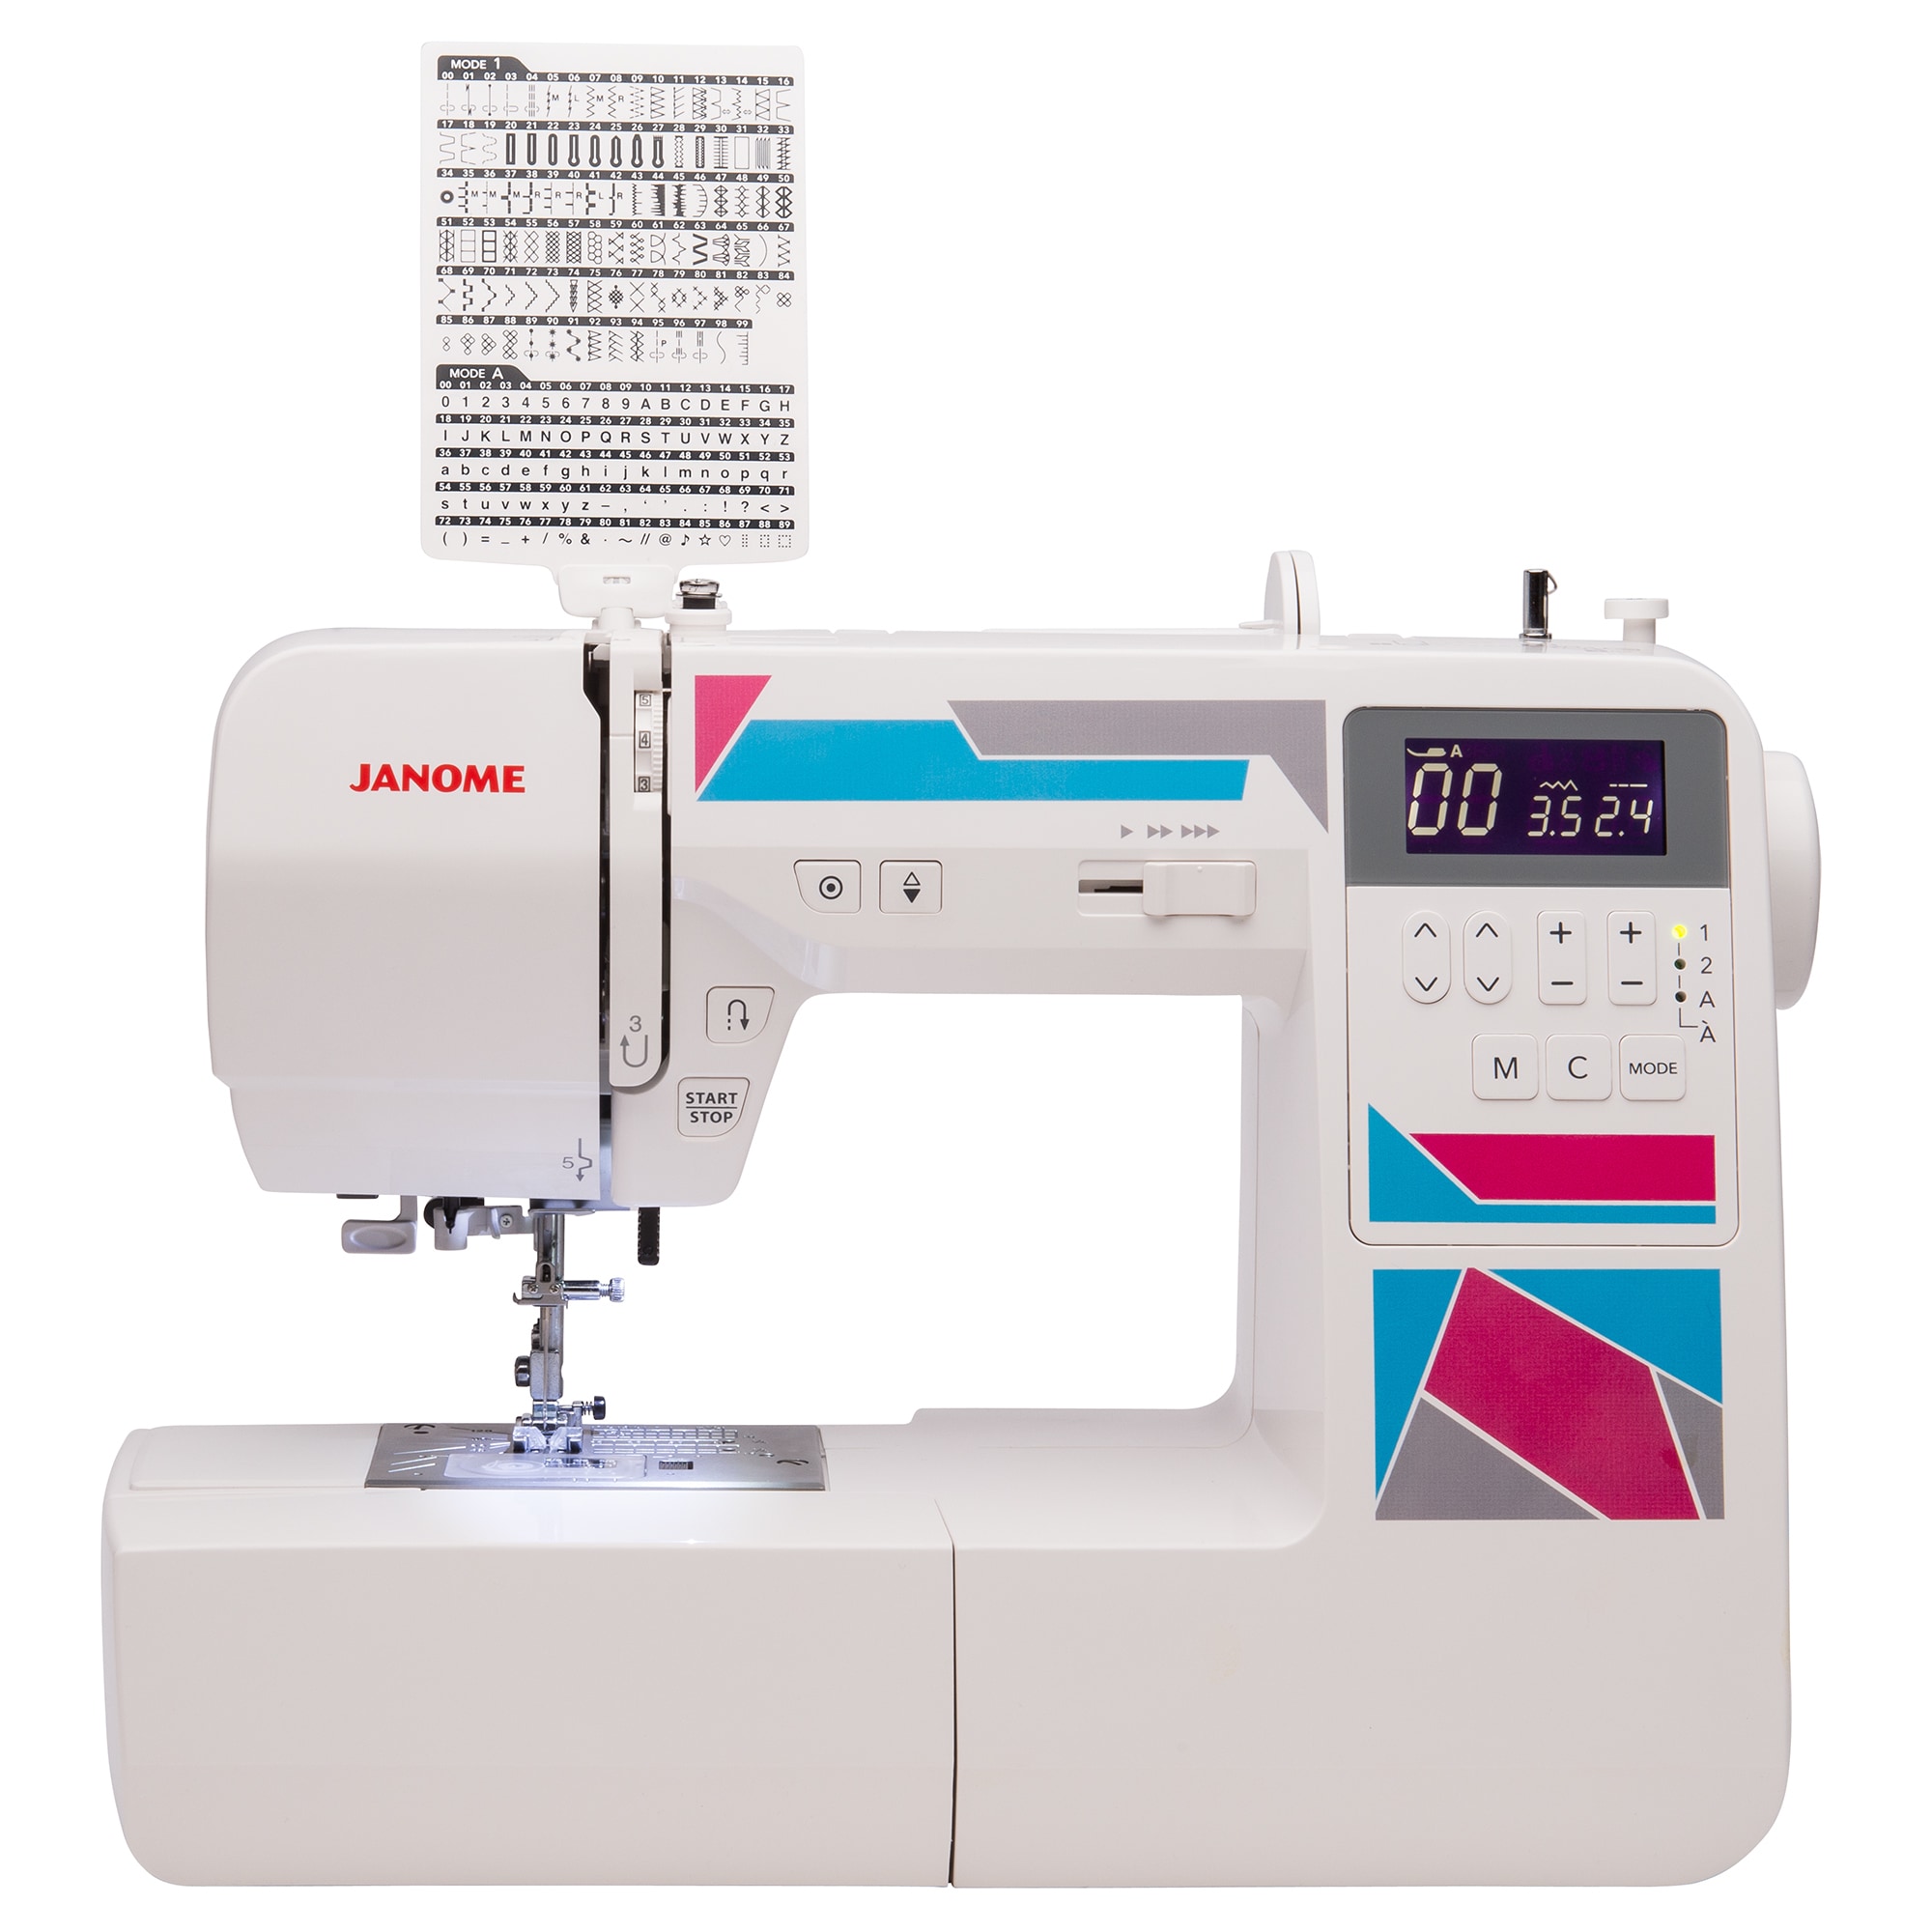 Janome sewing machine usb devices driver download for windows 10 free